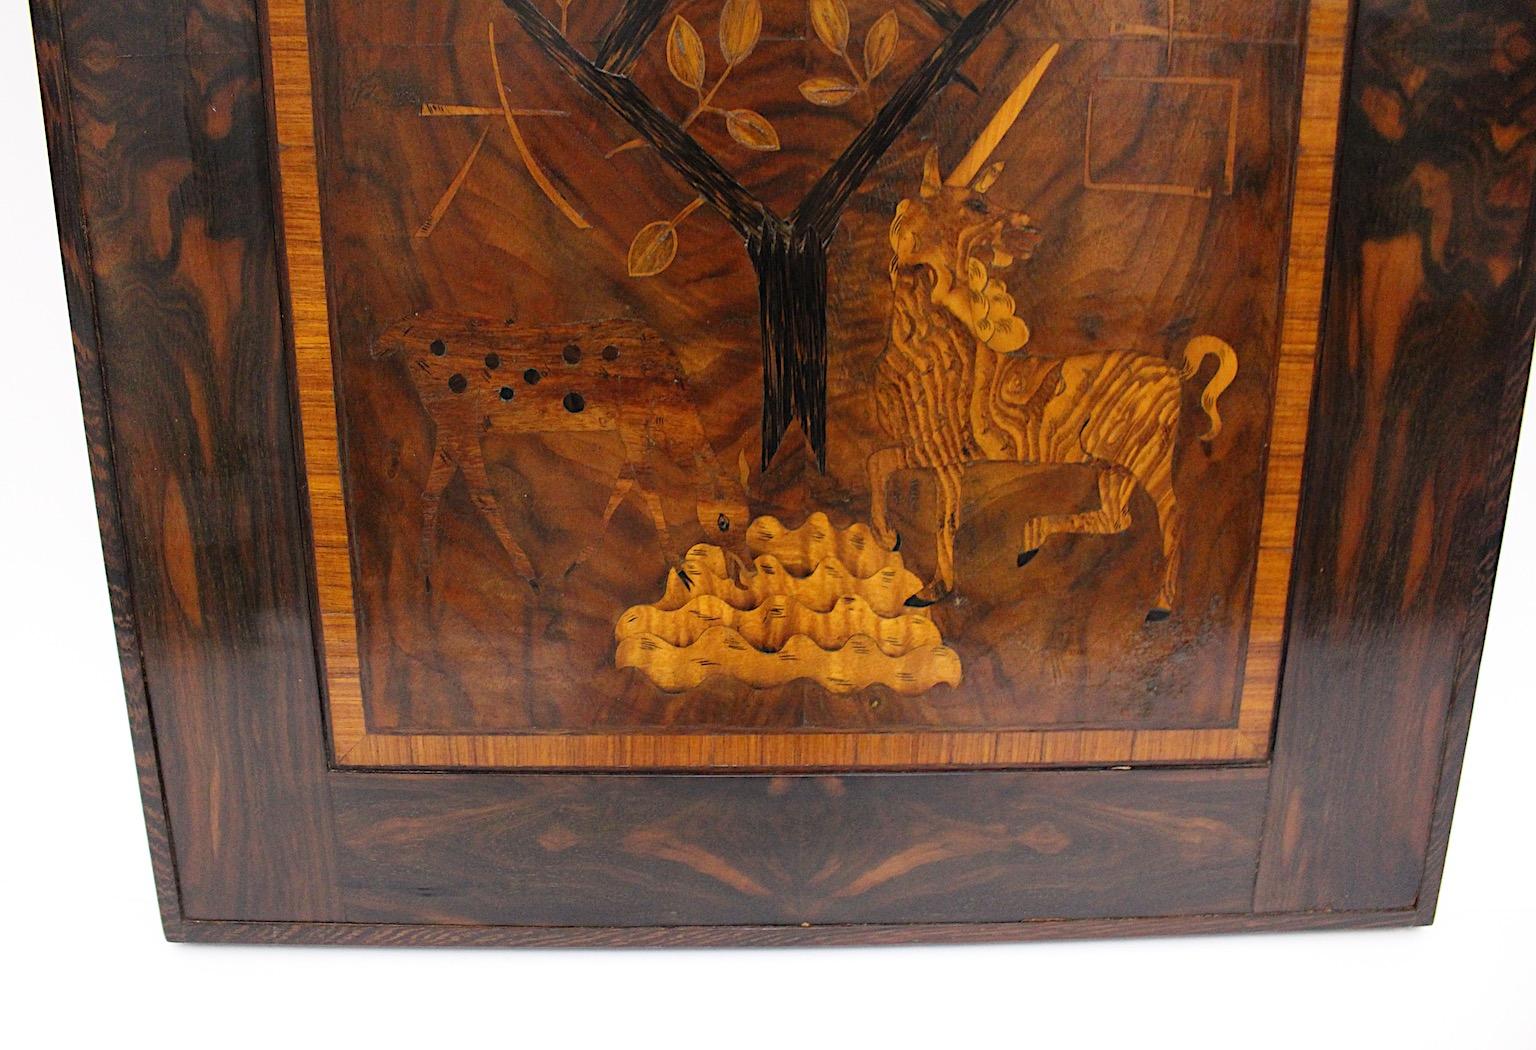 Art Deco Wood Inlaid Picture Unicorn Pomegranate Tree 1920s Style Victor Lurje For Sale 1